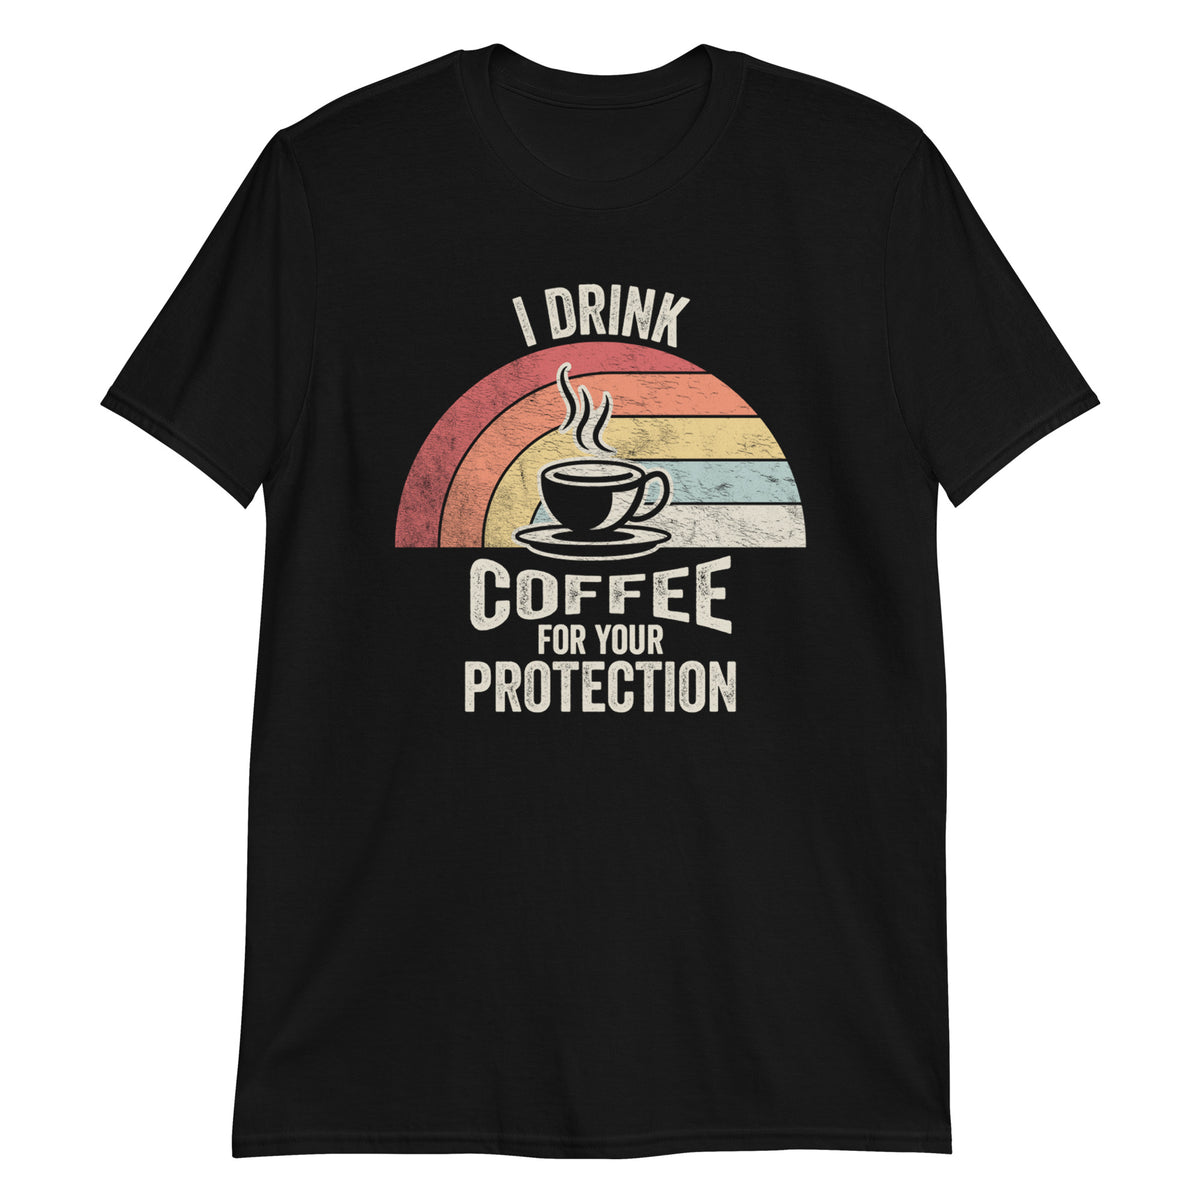 I Drink Coffeee For Your Protection T-Shirt